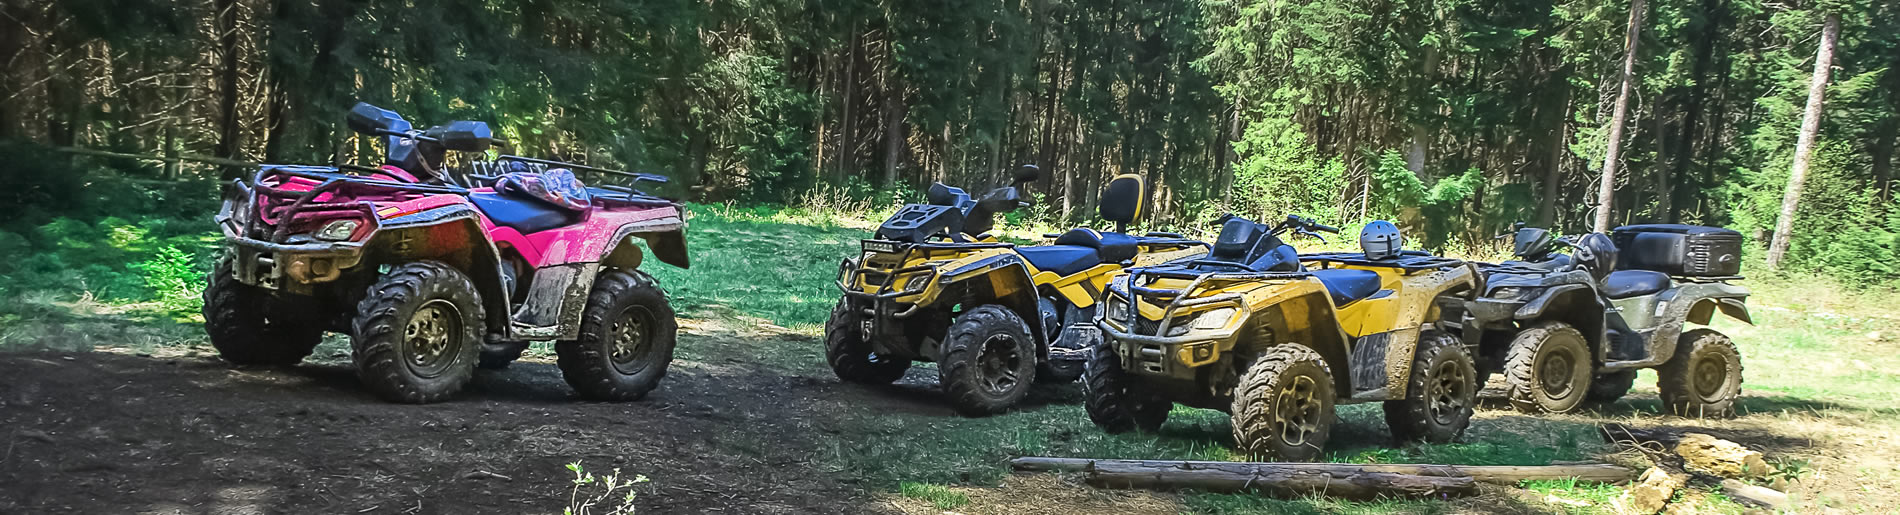  ATV bikes on a trail in summer